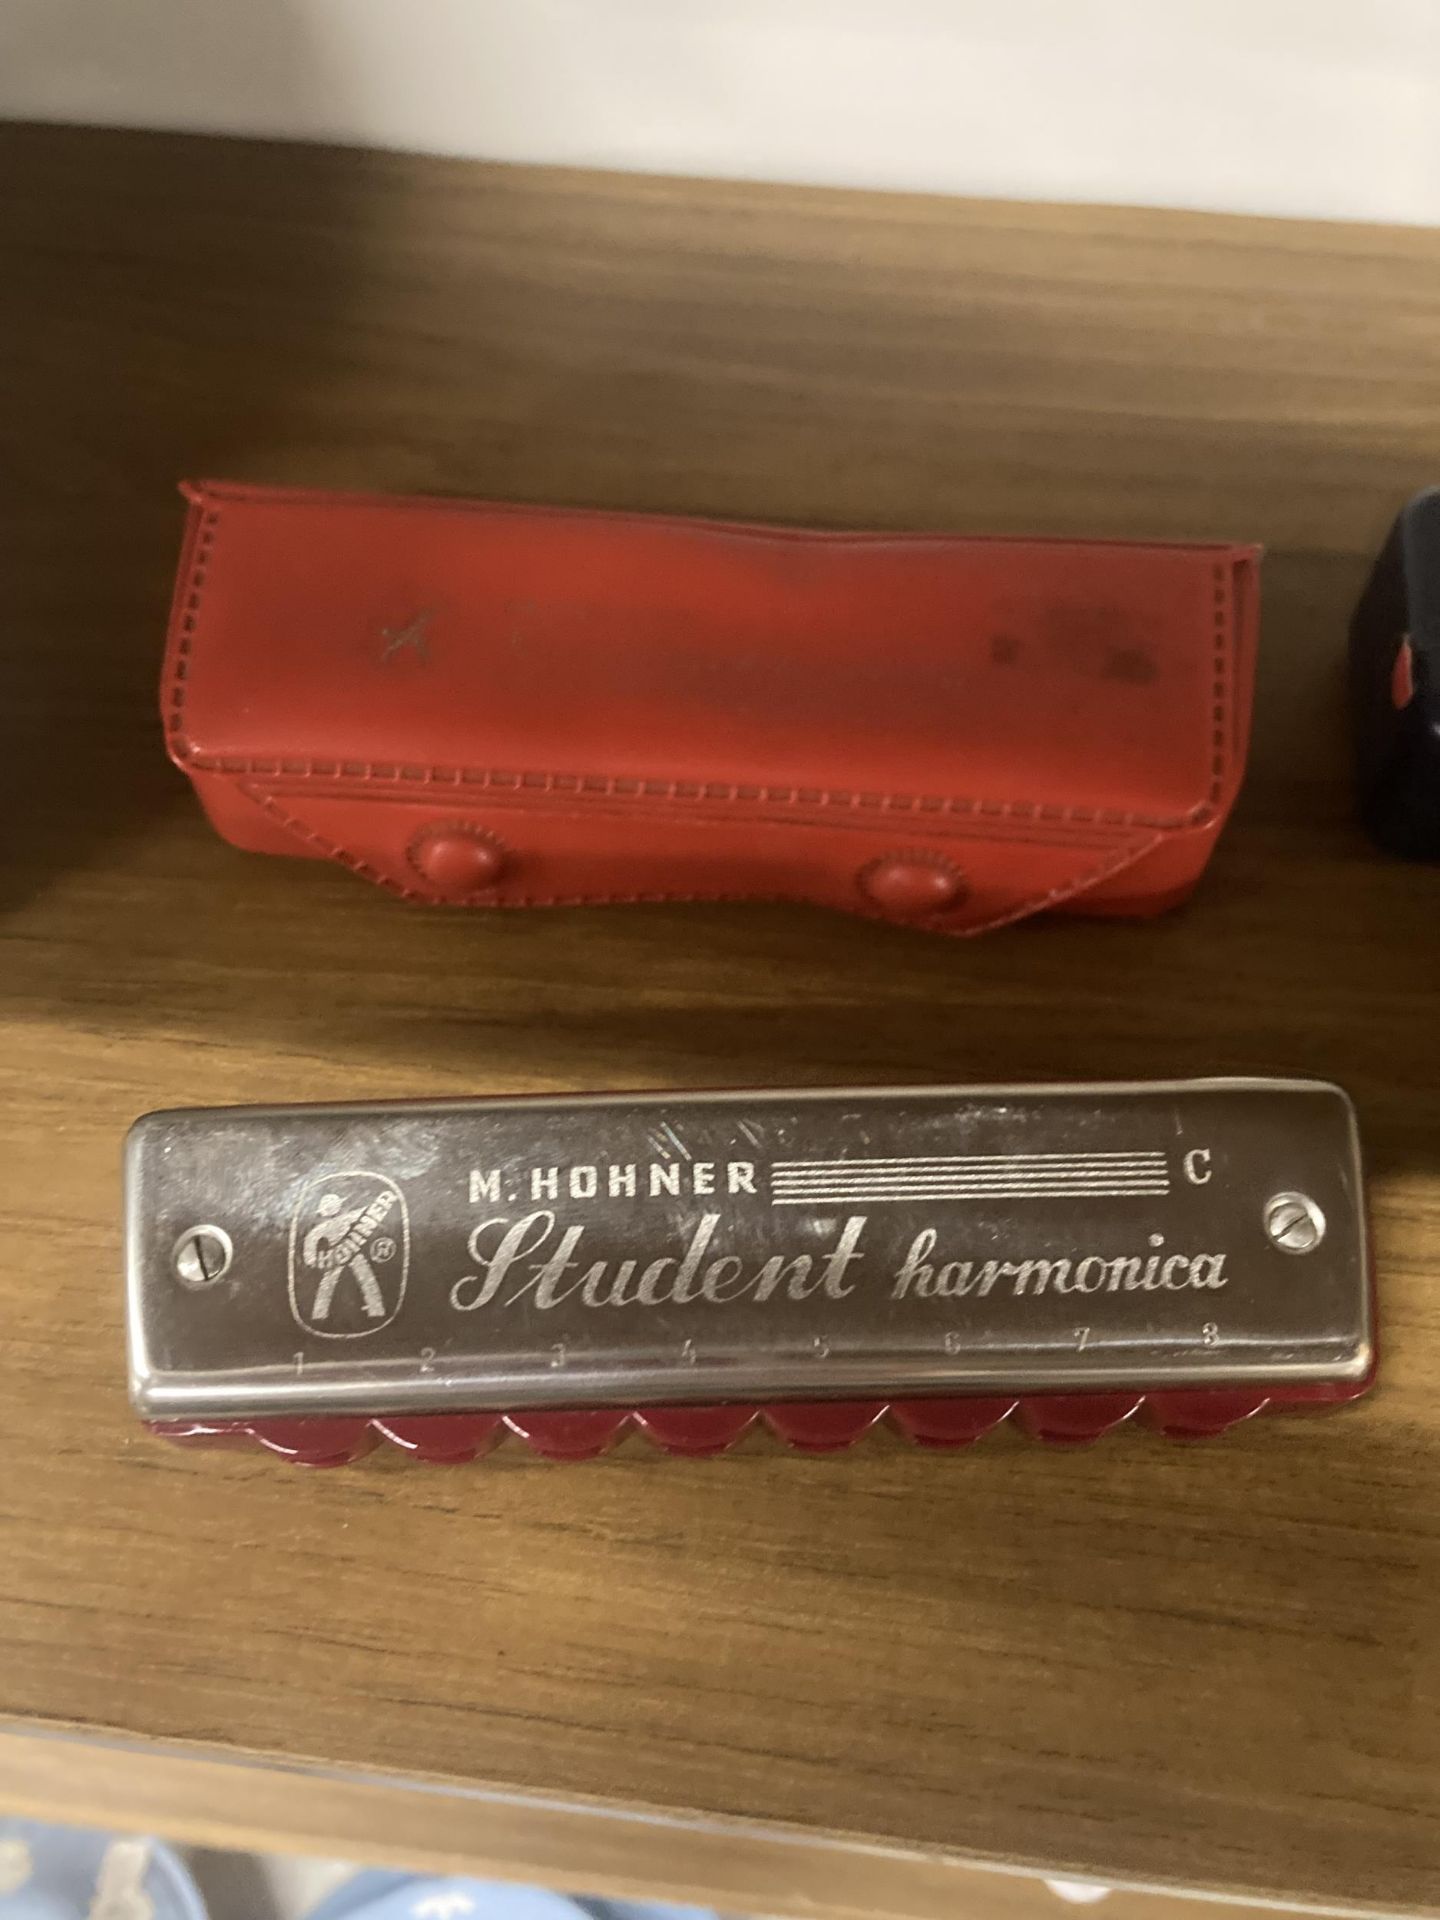 TWO HARMONICAS TO INCLUDE A HOHNER SILVER STAR IN KEY D PLUS A HOHNER STUDENT HARMONICA - Image 2 of 3